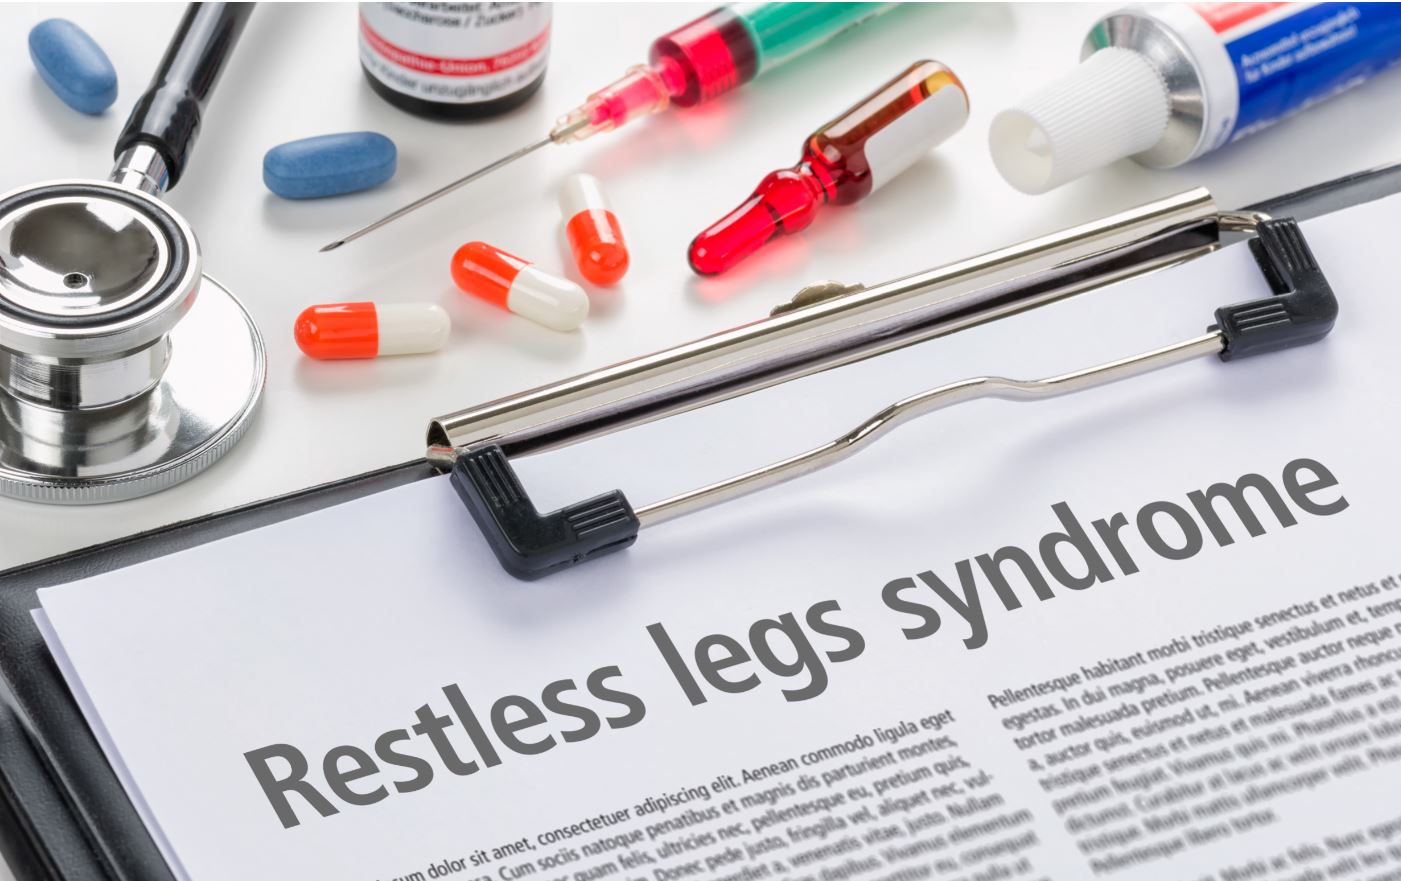 Exercise for Restless Legs Syndrome